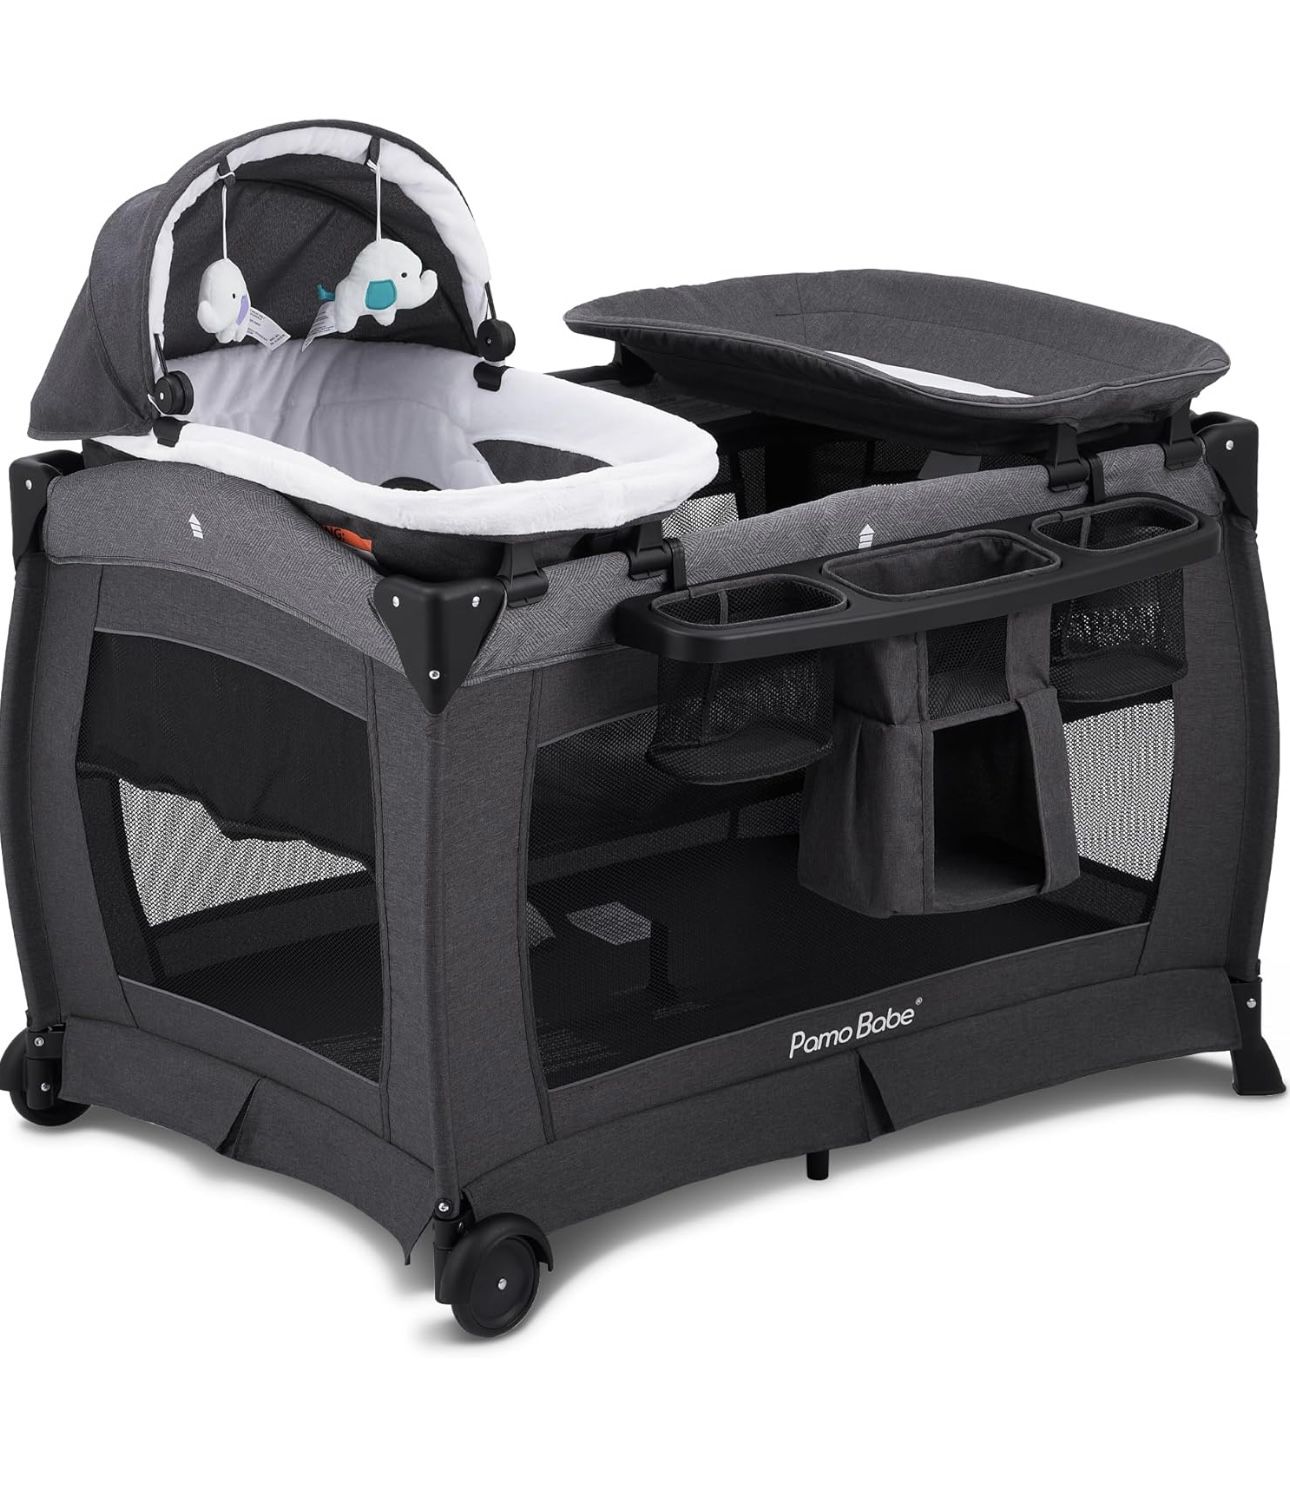 Was 200$ Pamo Babe Deluxe Nursery Center, Foldable Playard for Baby & Toddler, Bassinet, Mattress, Changing Table for Newborn(Black)